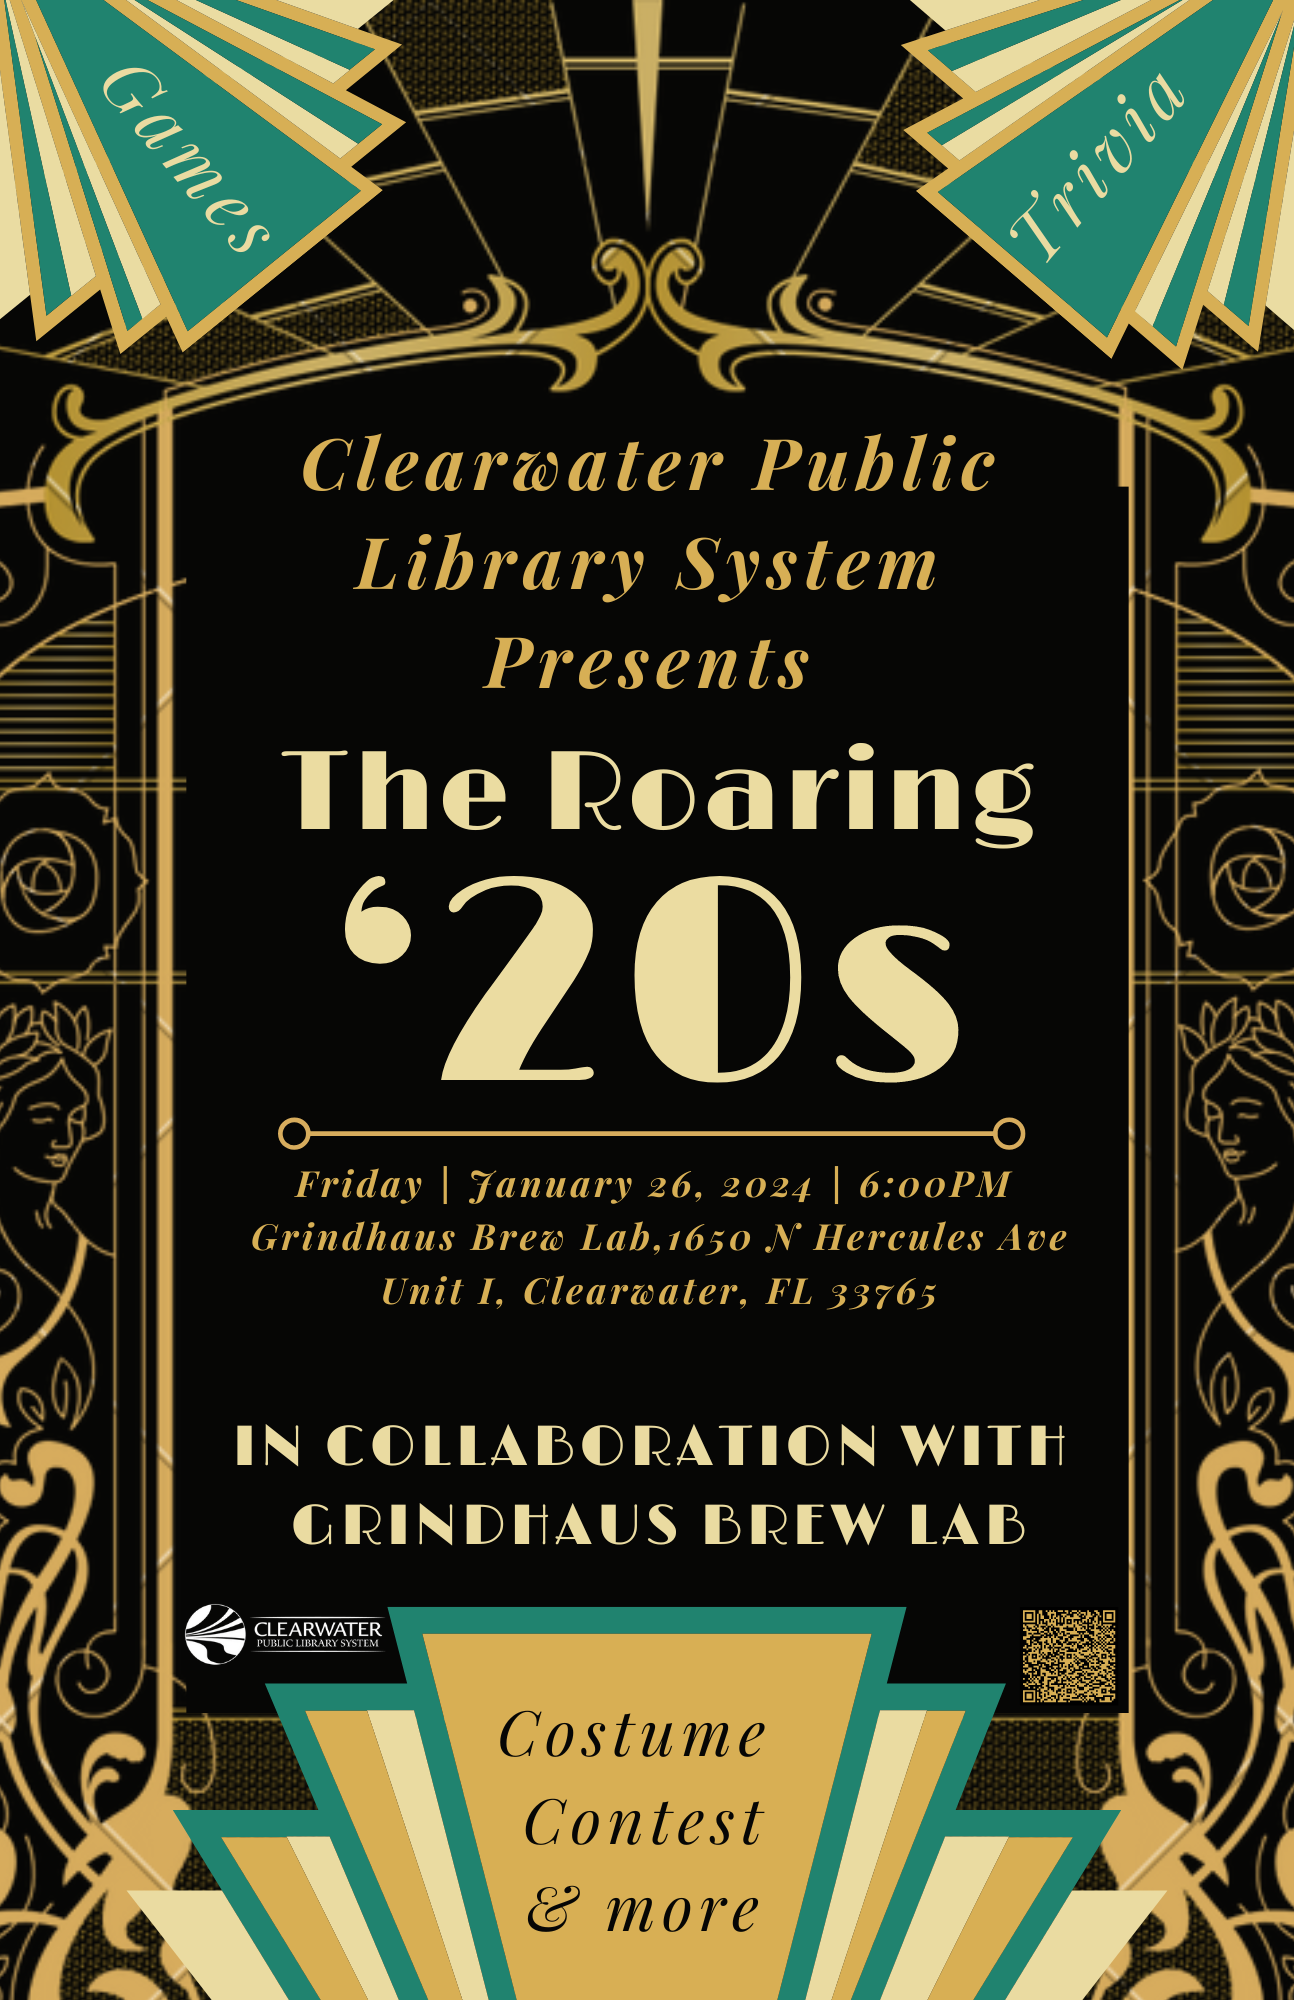 Art Deco themed poster advertising the event